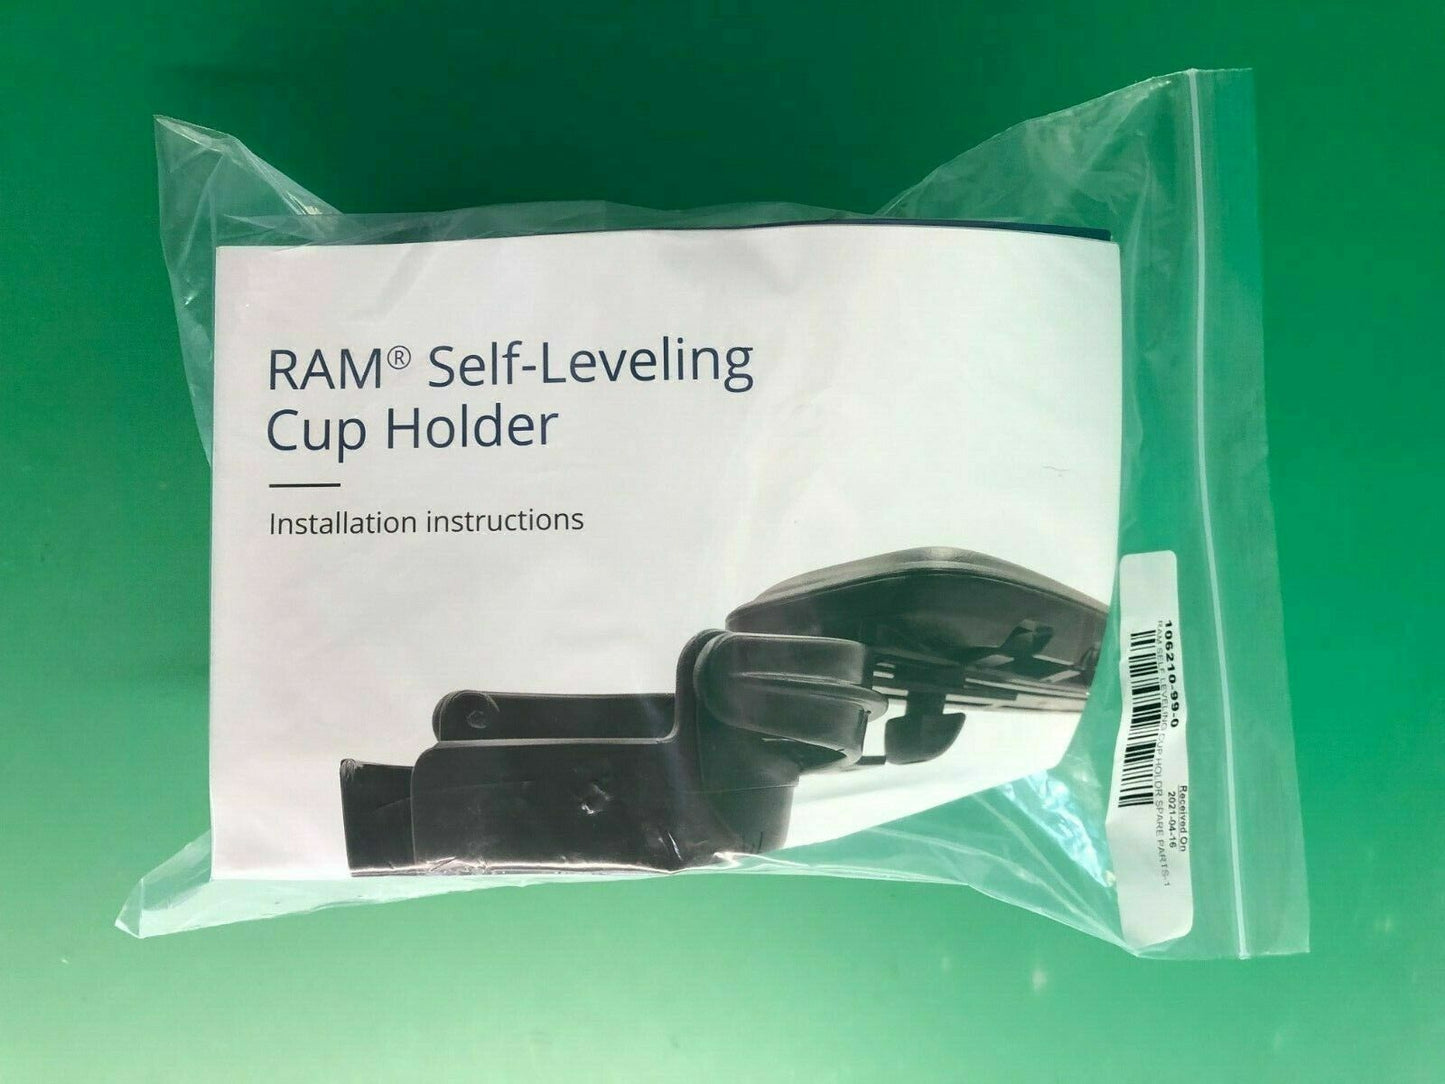 Permobil Ram Self Leveling Cup Holder for Permobil Powerchair 1829004 #i269